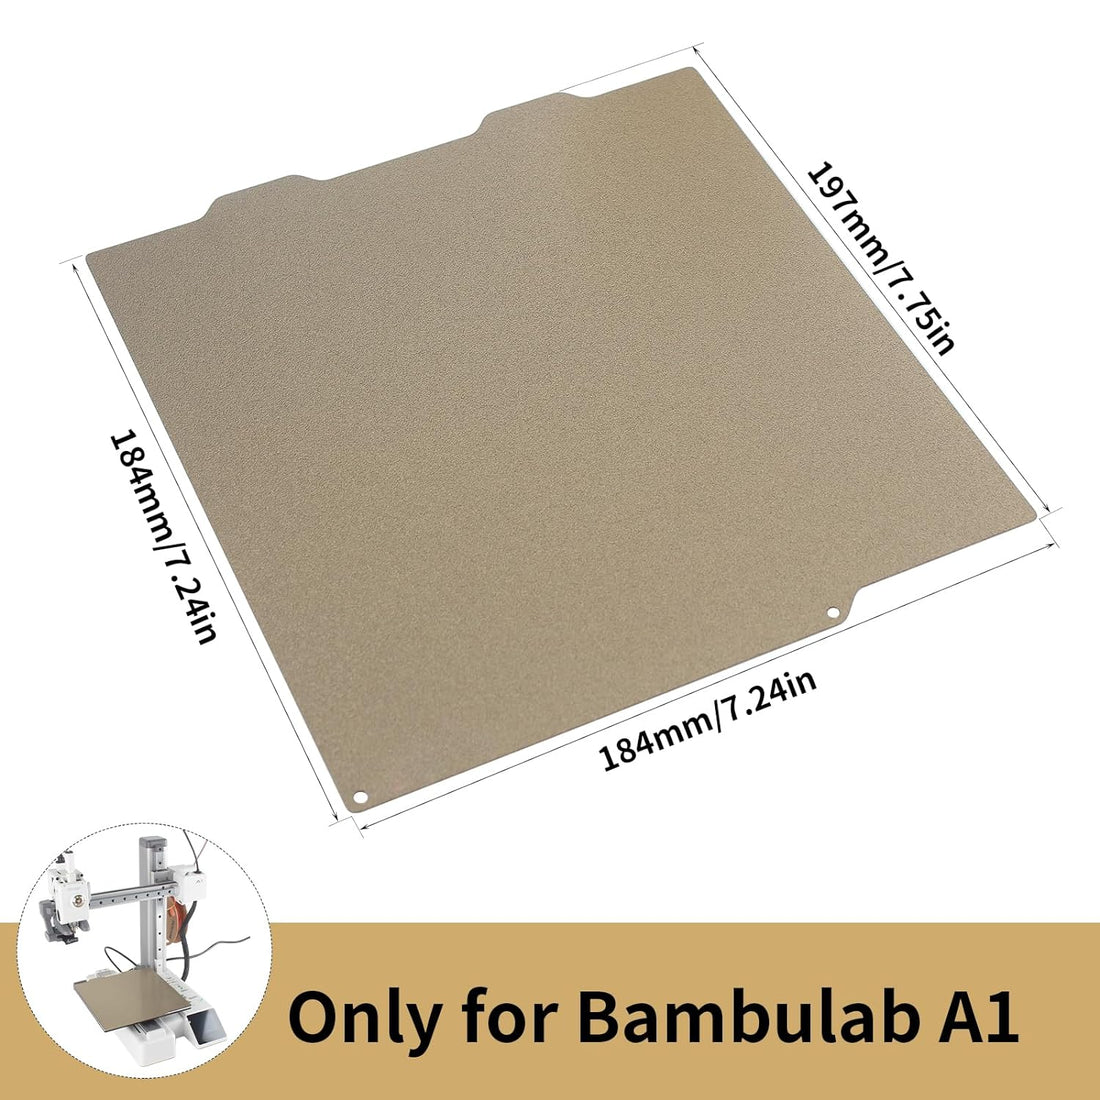 Imdinnogo 3D Printer Platform Bambulab A1 Mini PEI Powder Coating Stainless Steel Plate 184 x 184 mm Gold: Dual Texture PEI Spring Steel Plate Strong Adhesion and Easy Prints Release BCZAMD